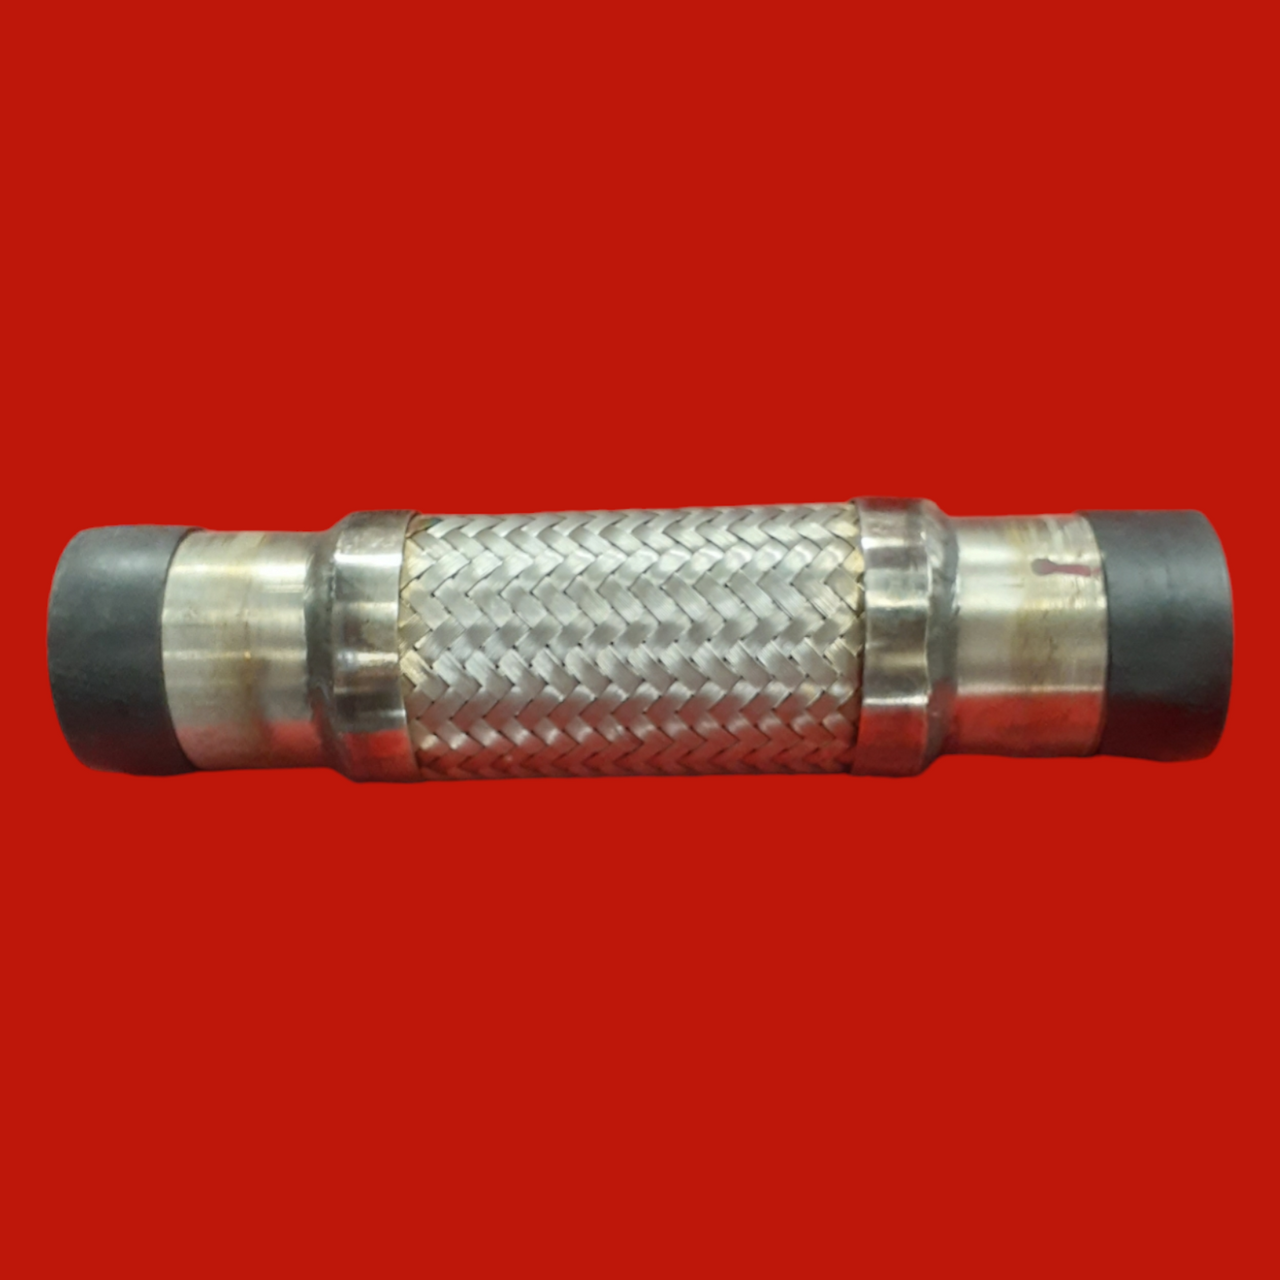 Stainless Steel Braided Flex Hose Assembly 2" x 10-1/2"